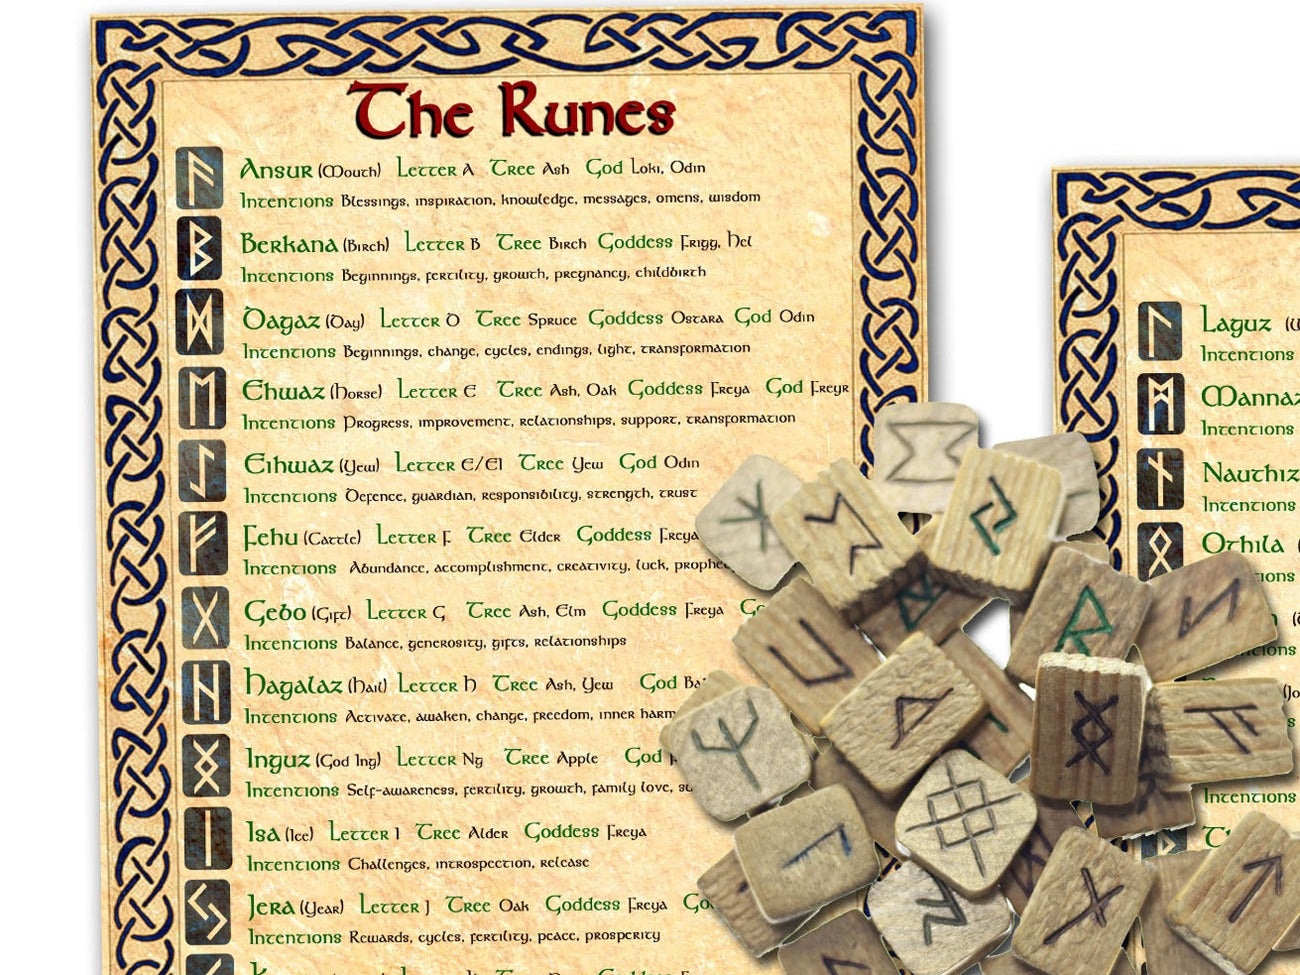 RUNES ElLDER FUTHARK, Viking Runes Cheat Sheets, Witchcraft Magic Sigil, Symbol Meanings, Witchy Journal, Stone Spell, 2 Printable pages - Morgana Magick Spell